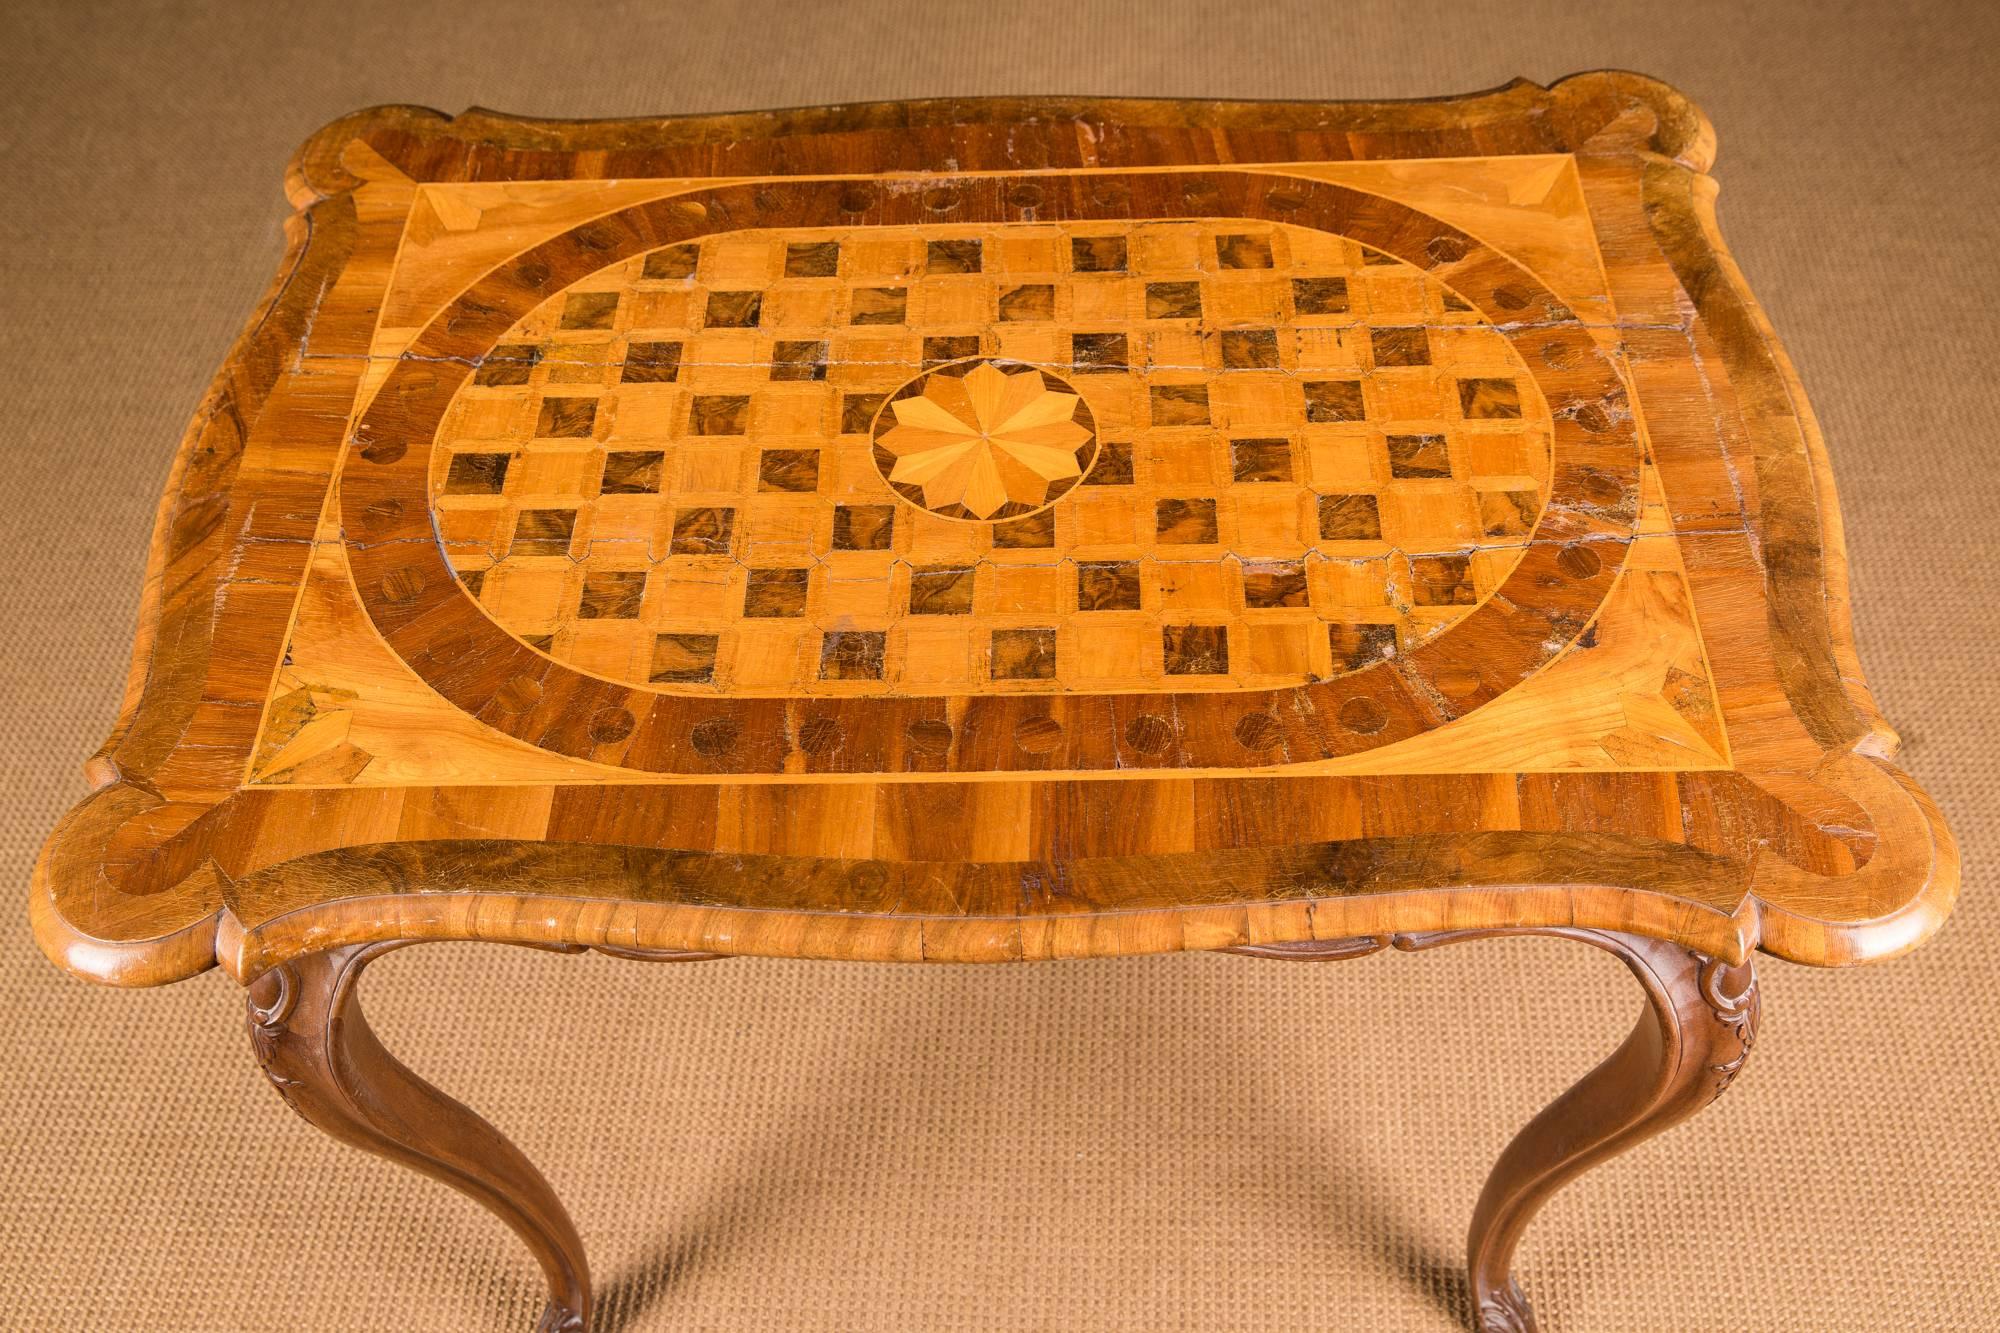 Veneer 18th Century, Original Antique Baroque Table with Inlaid from Solid Walnut